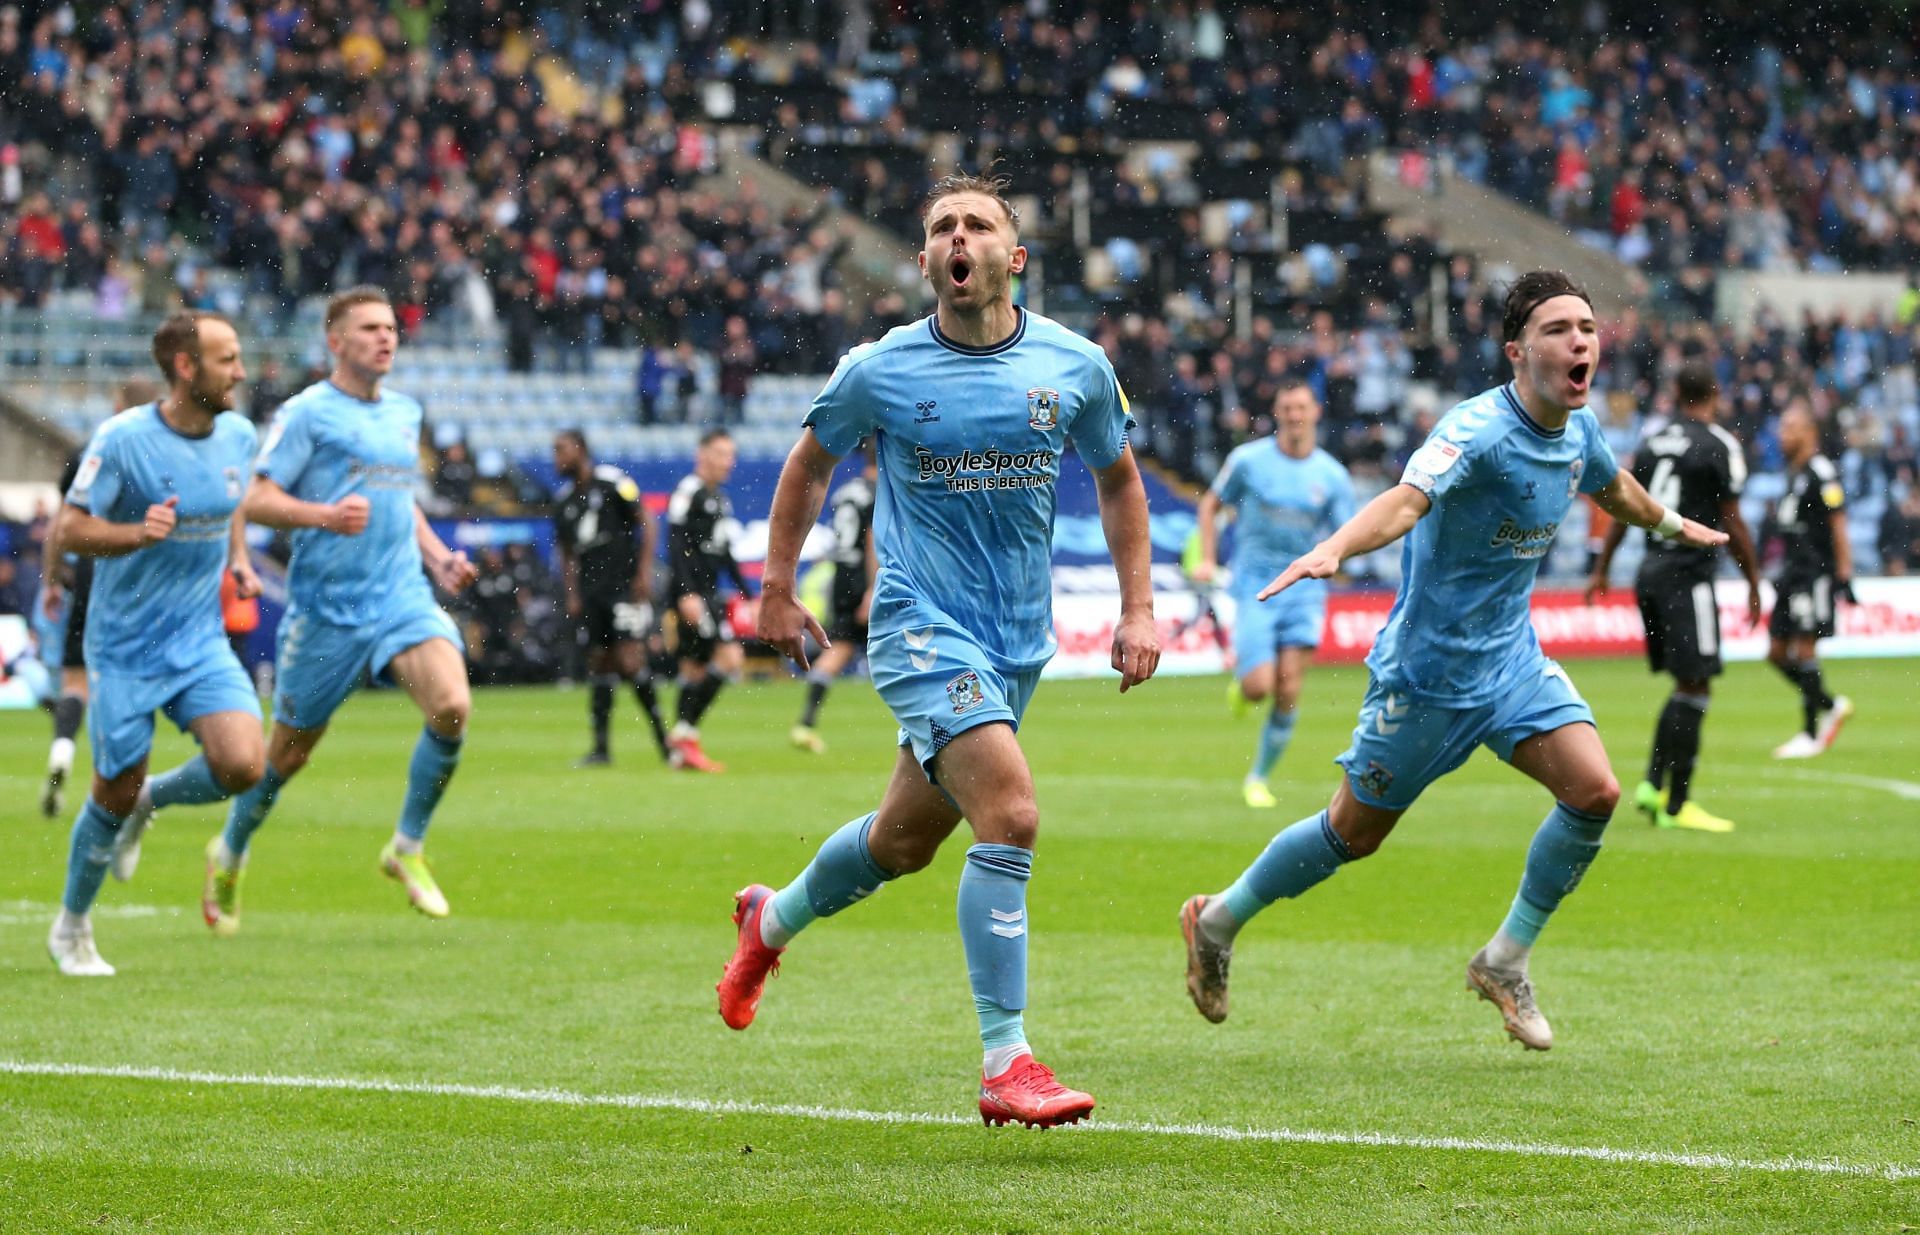 Coventry City will battle with Preston North End for three points